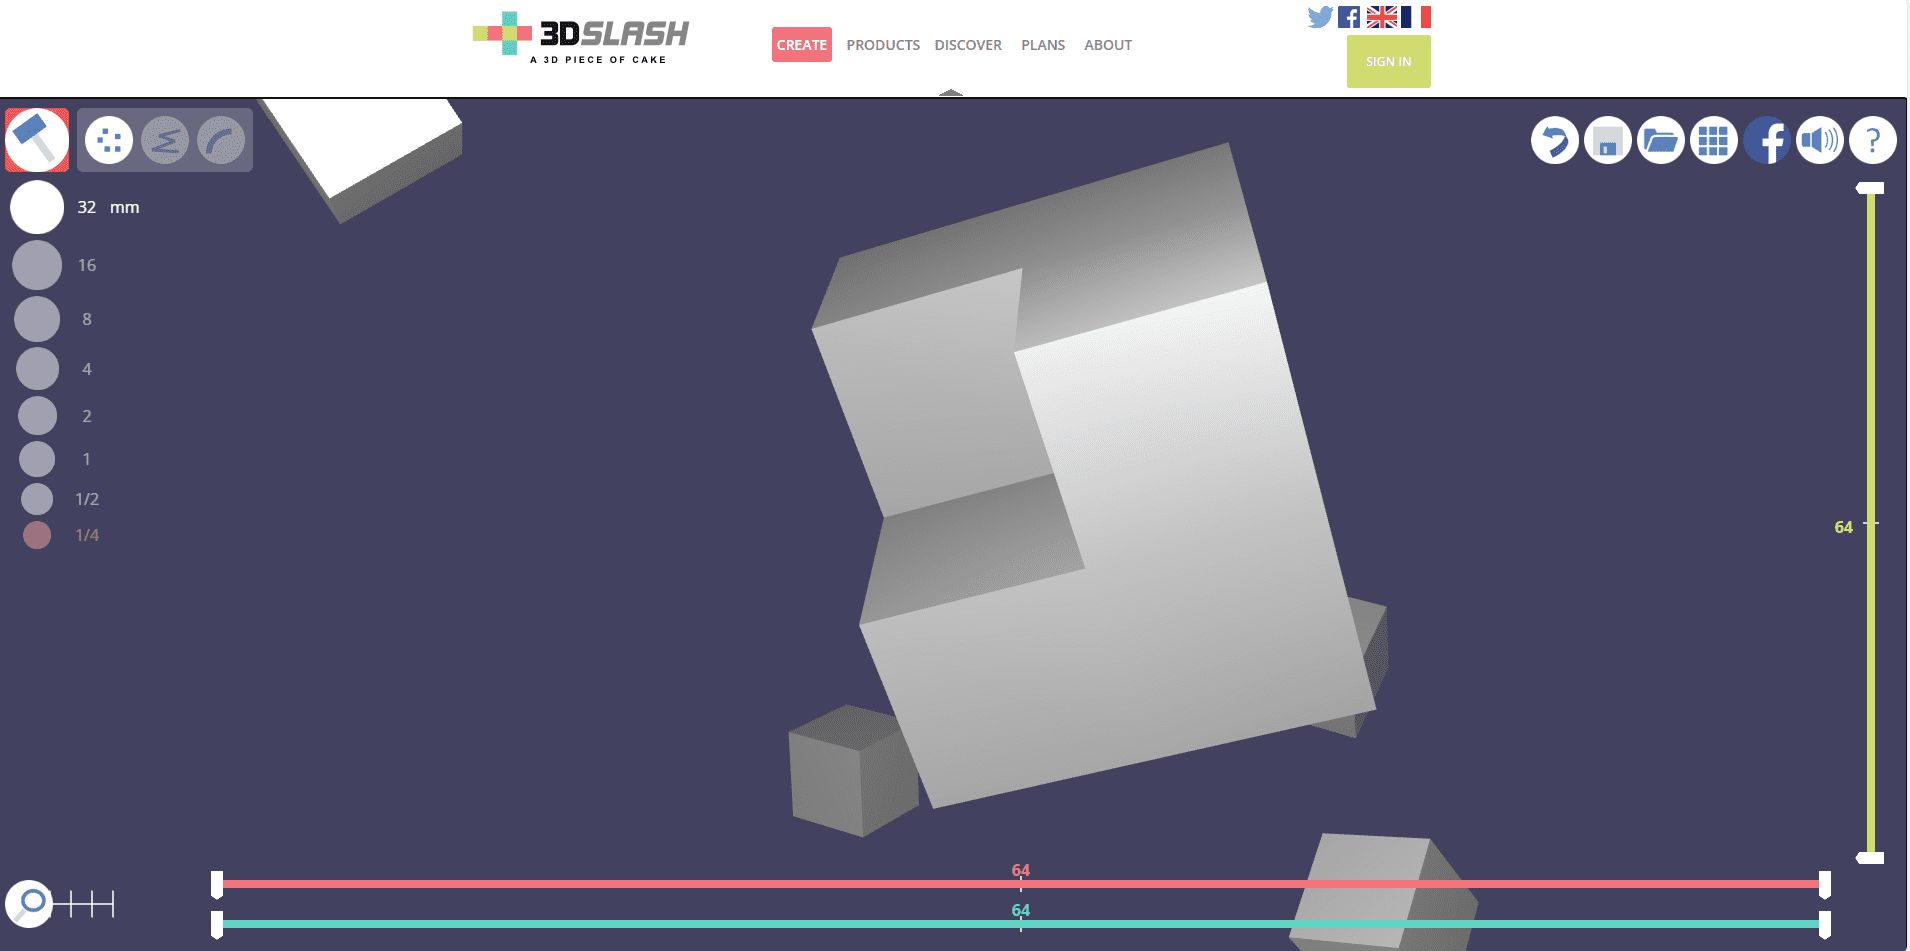 The dashboard of 3D Slash, a program that introduces students to 3D modeling